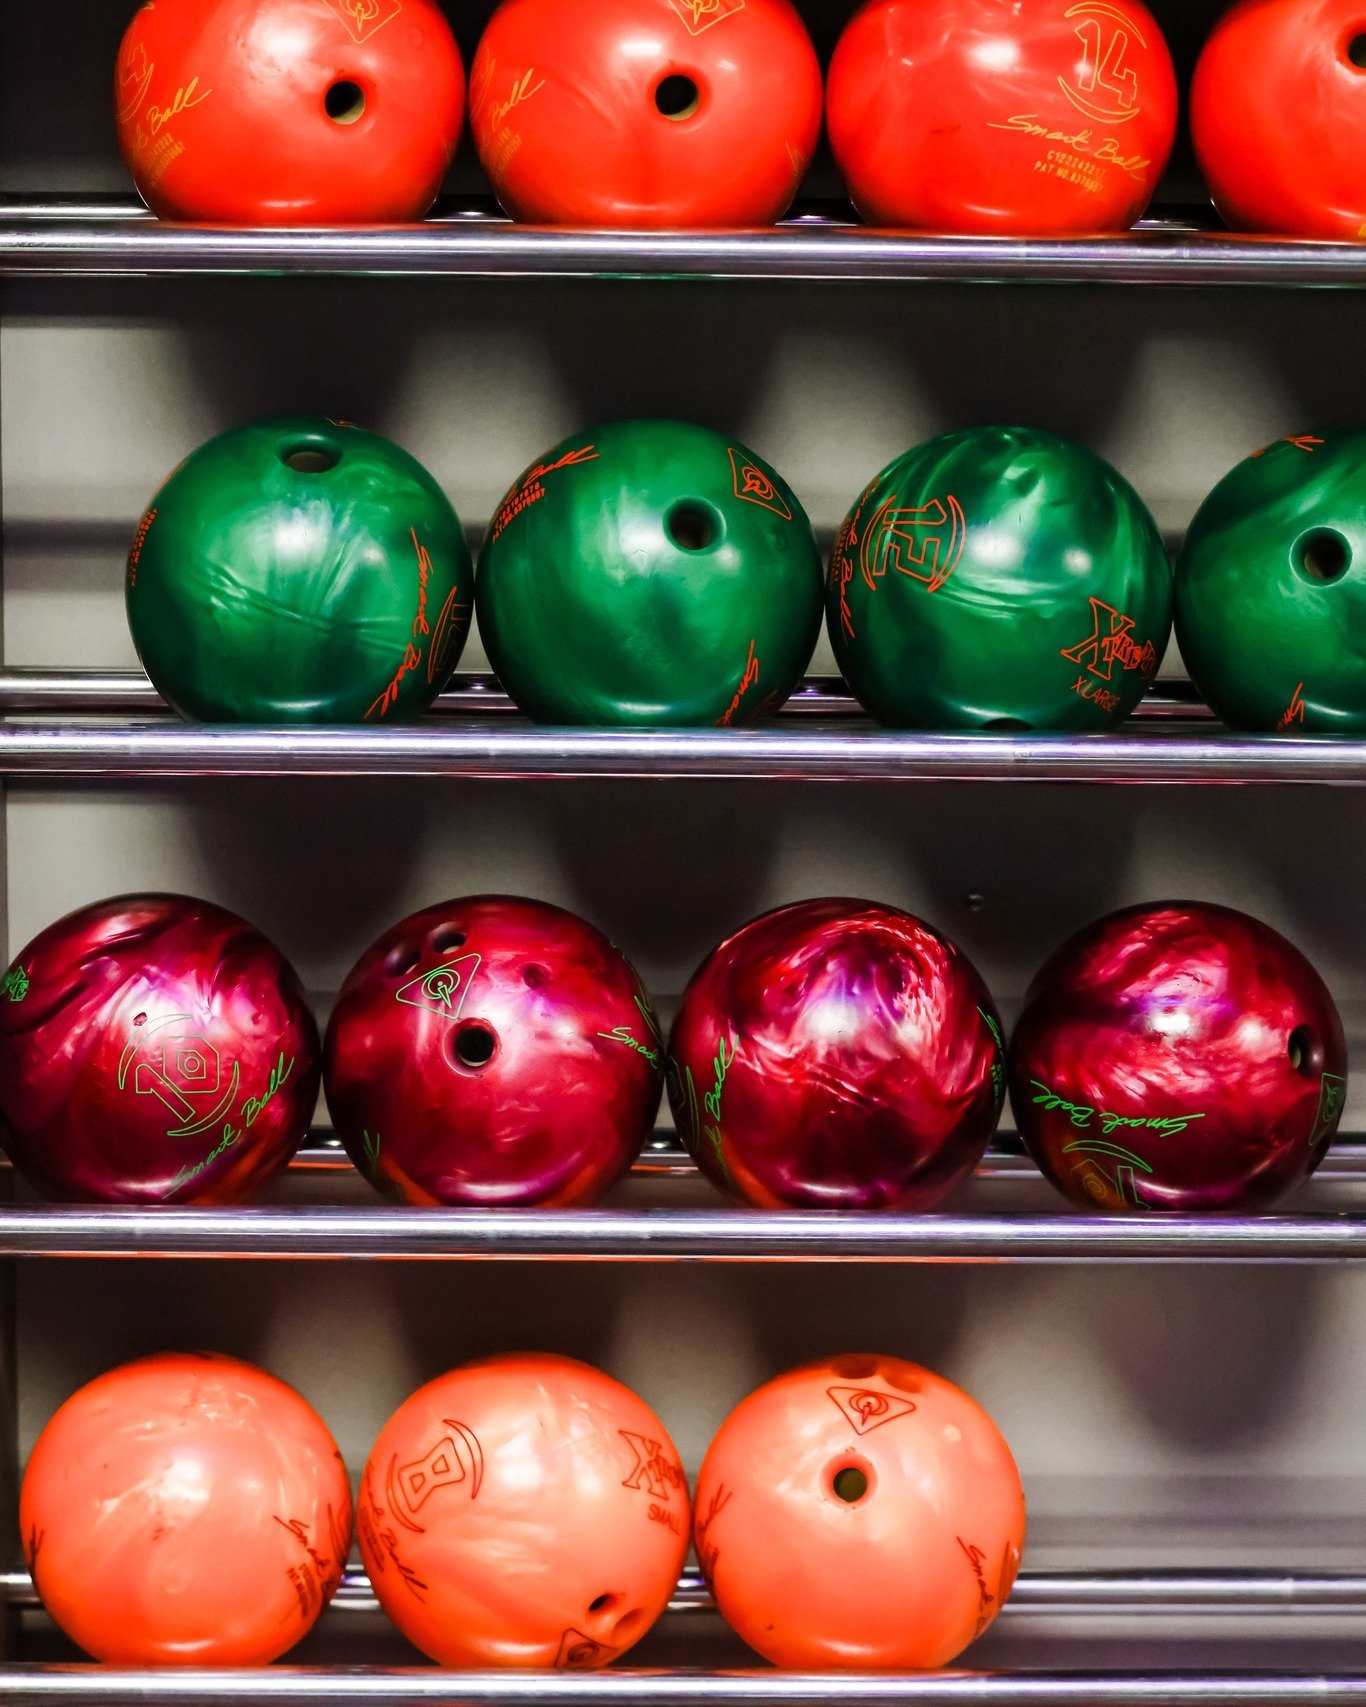 Ready to roll into summer? Swipe ➡️ to check out some of our featured summer bowling leagues get ready for a season of strikes, spares, and summer fun! Sign up now and let the good times roll! 🌞🎳 #harleysbowl #bowlingleagues #summerbowling